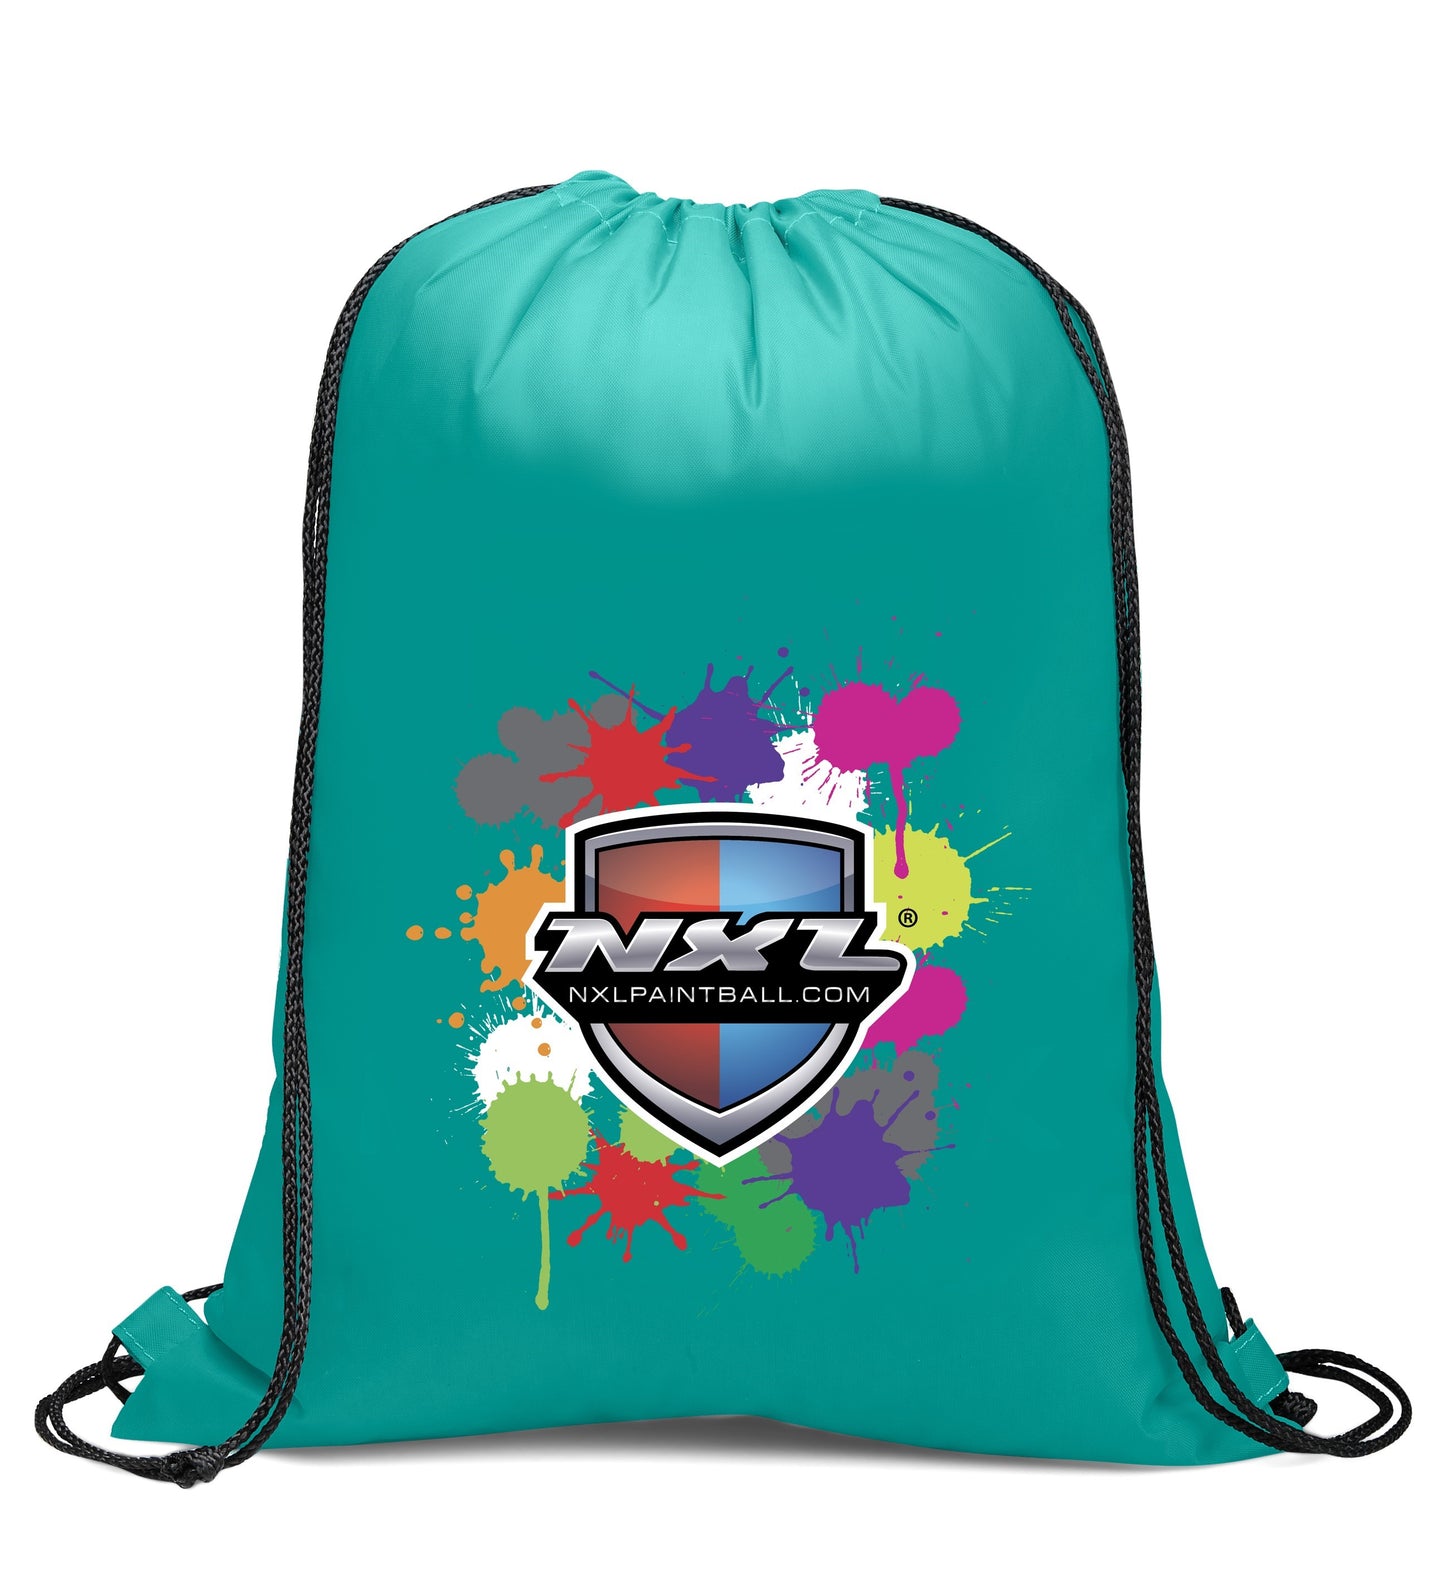 Condor 210D Drawstring Bag - Turquoise Only